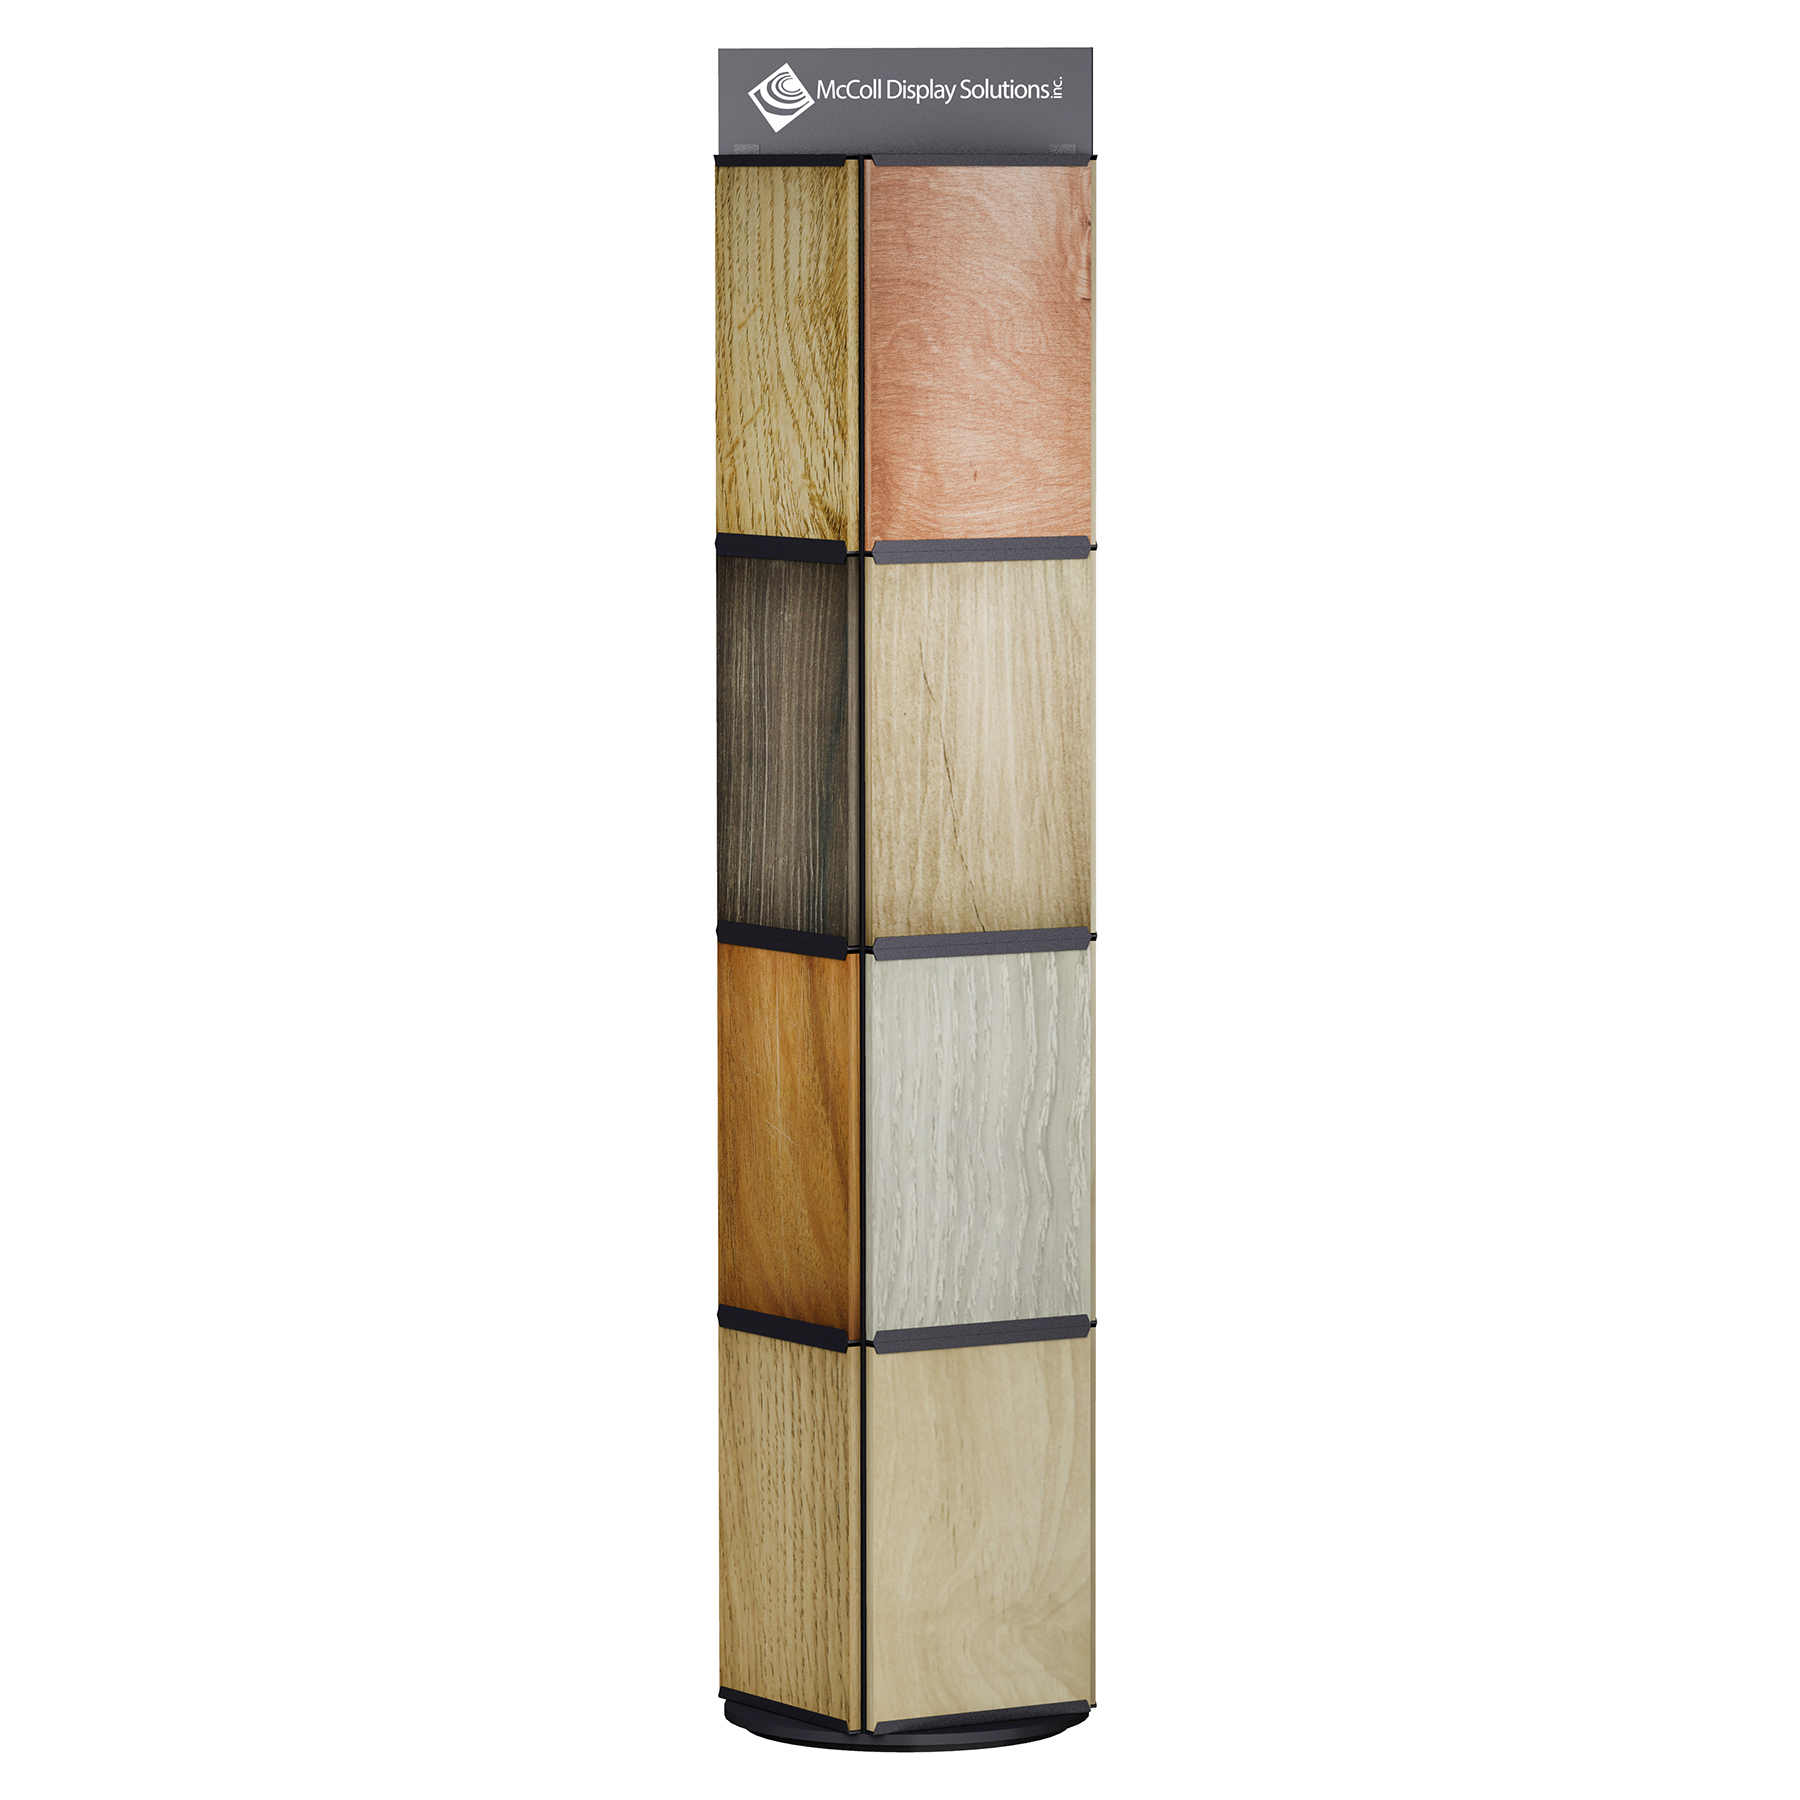 The Popular CD10 Tower Rotates to Display Hardwood Laminate Bamboo Reclaimed Wood Plank Samples